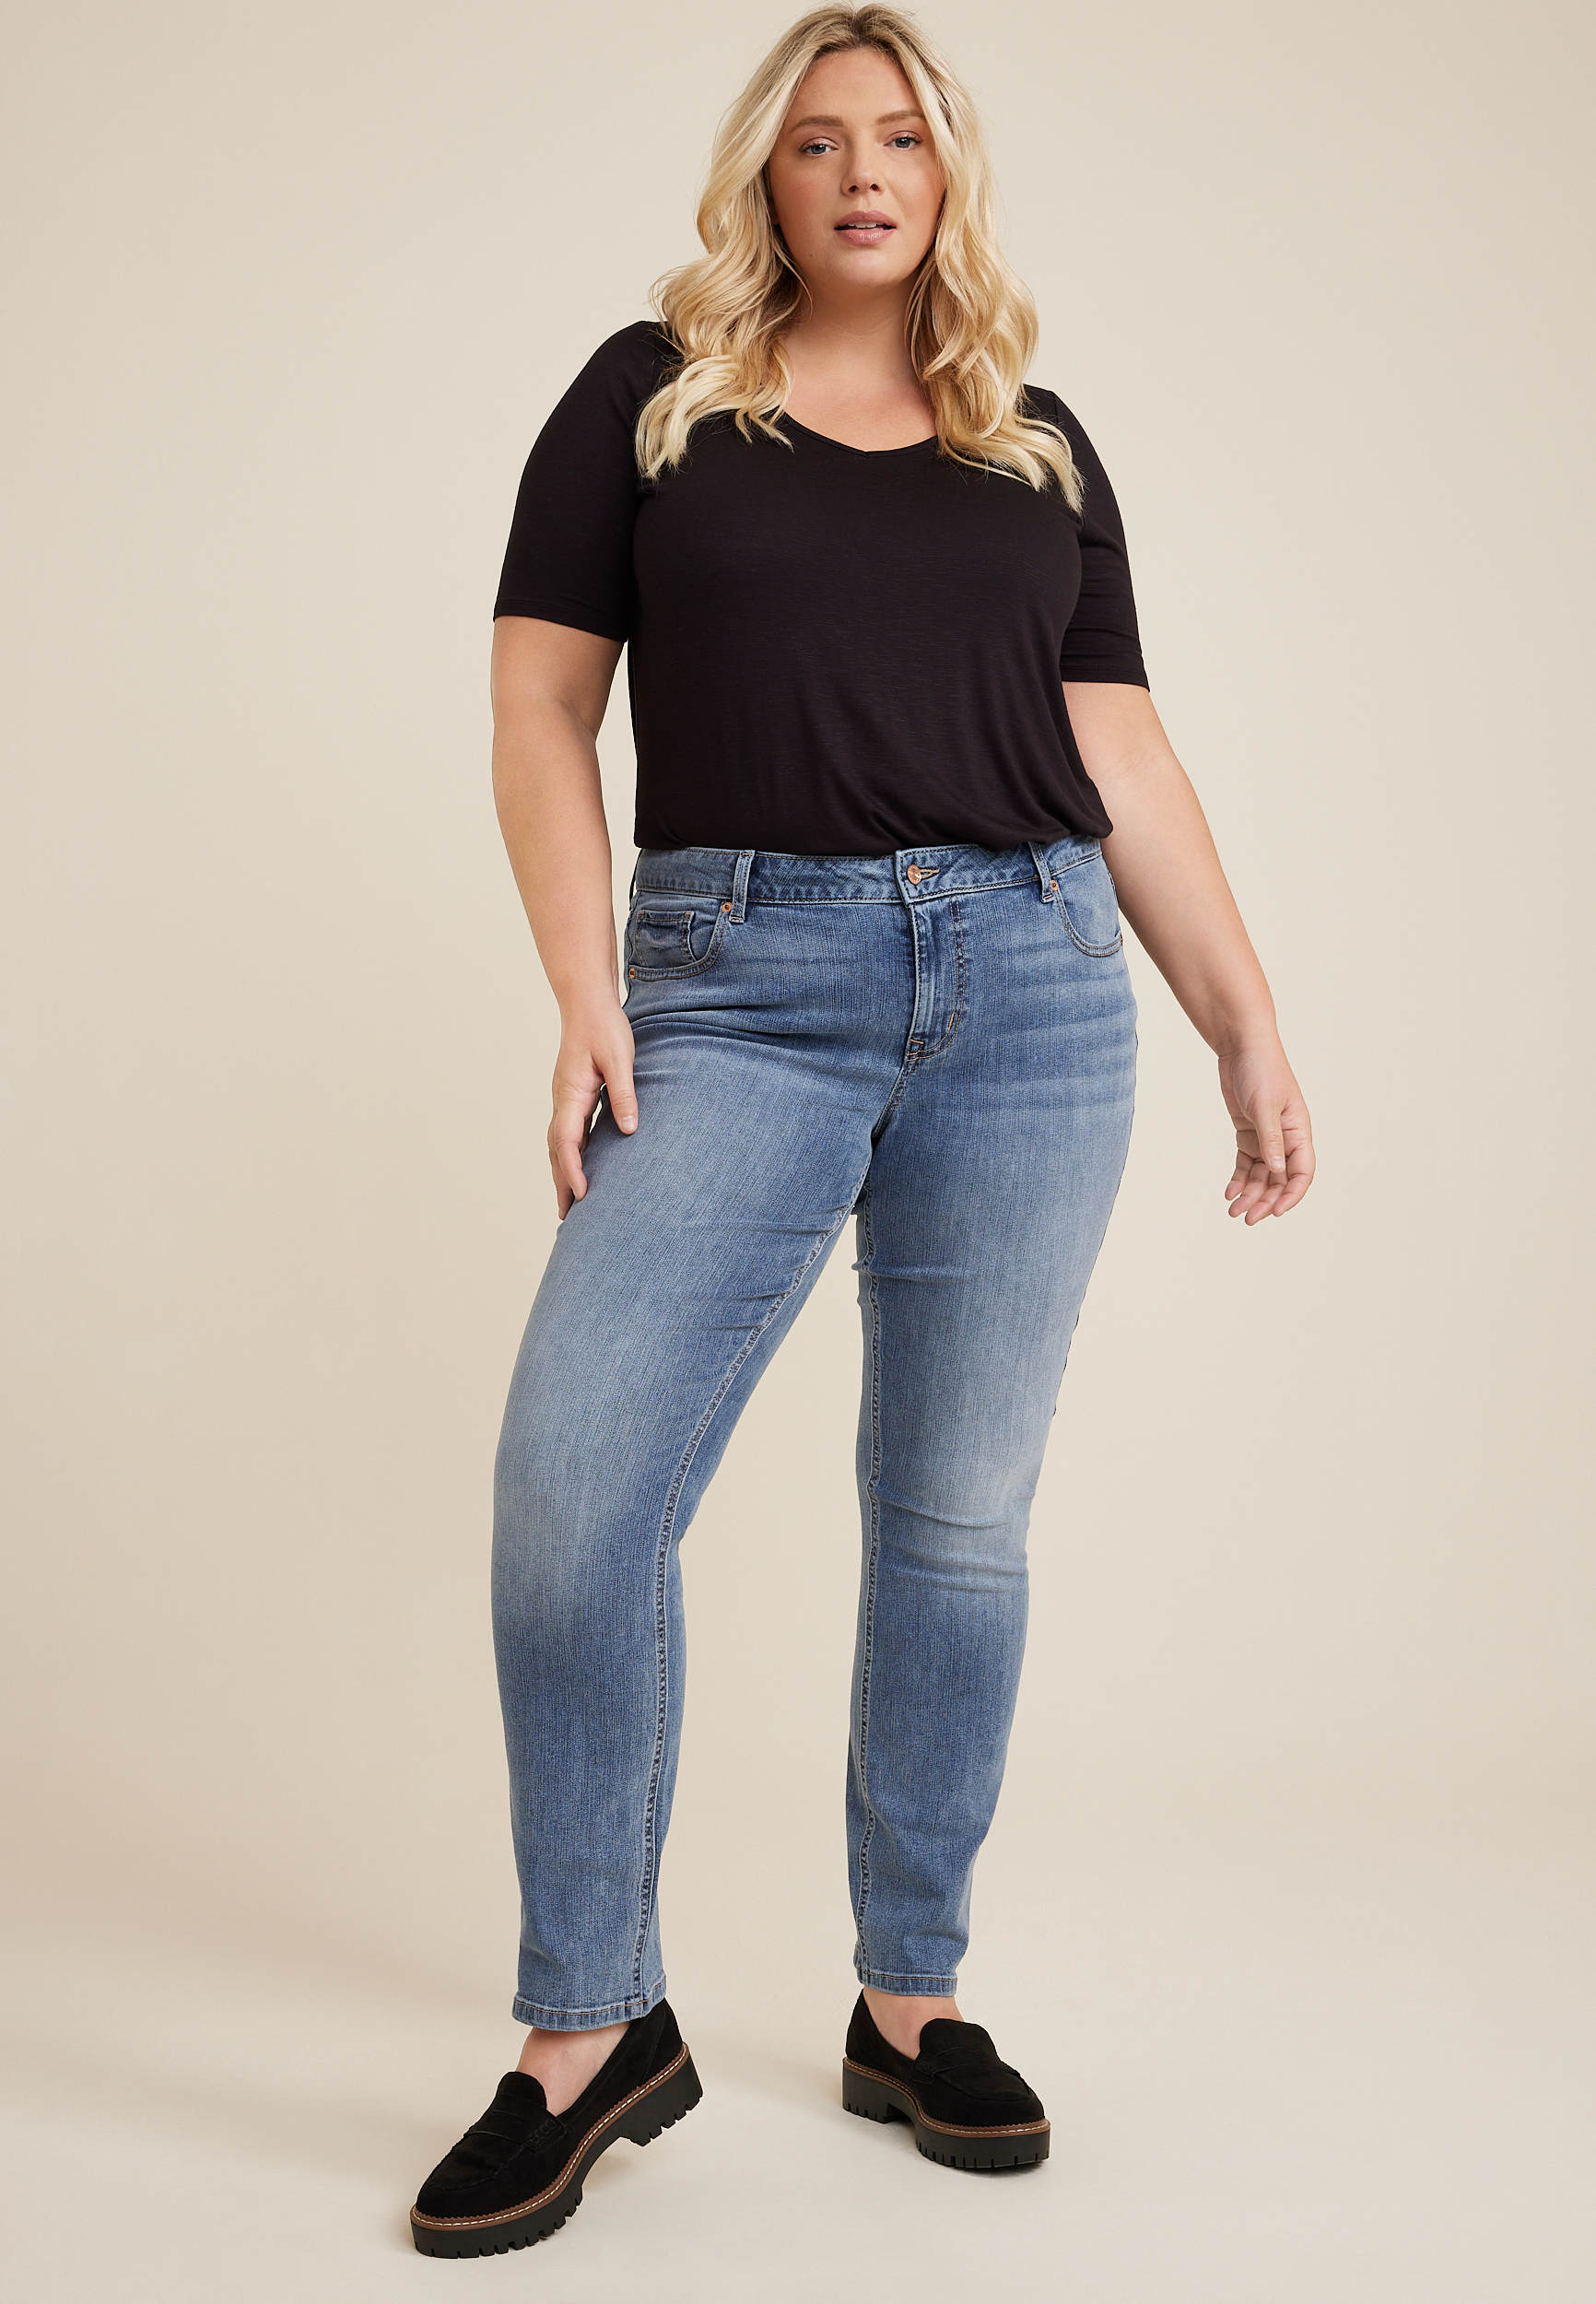 3 plus size summer outfits + your new favorite jeans all from maurices